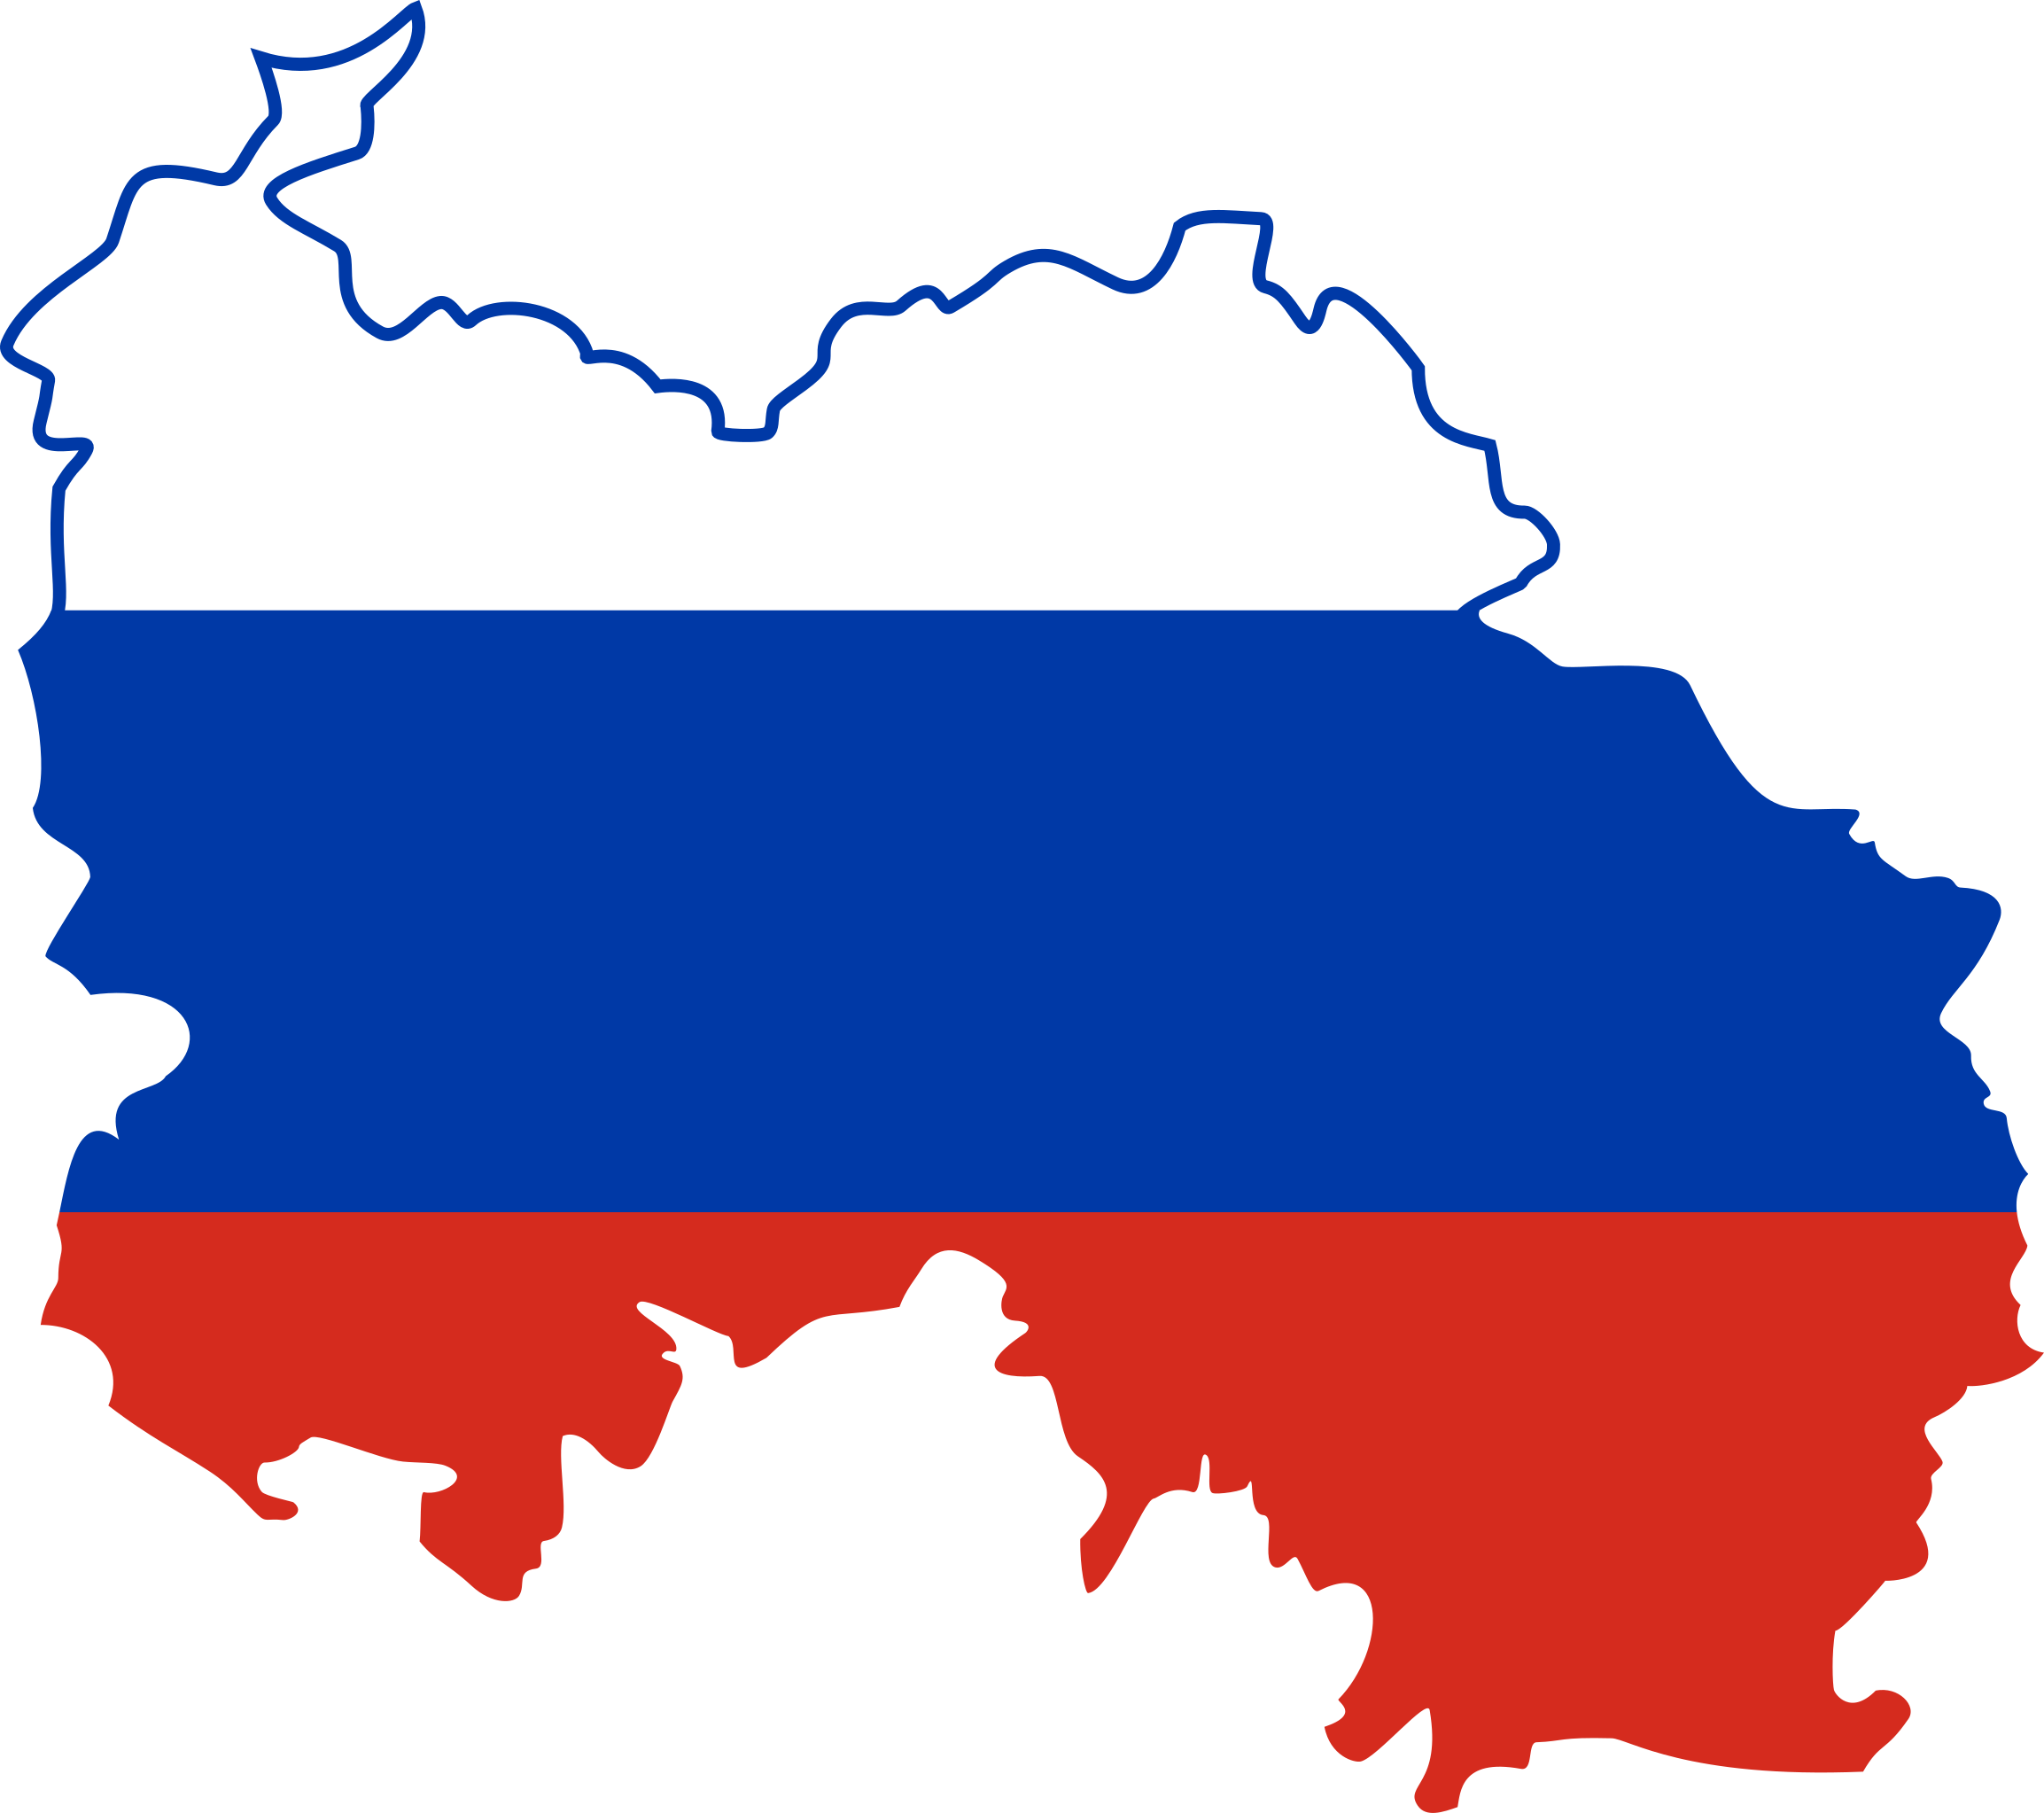 File:Flag-map of Russia.svg - Wikimedia Commons